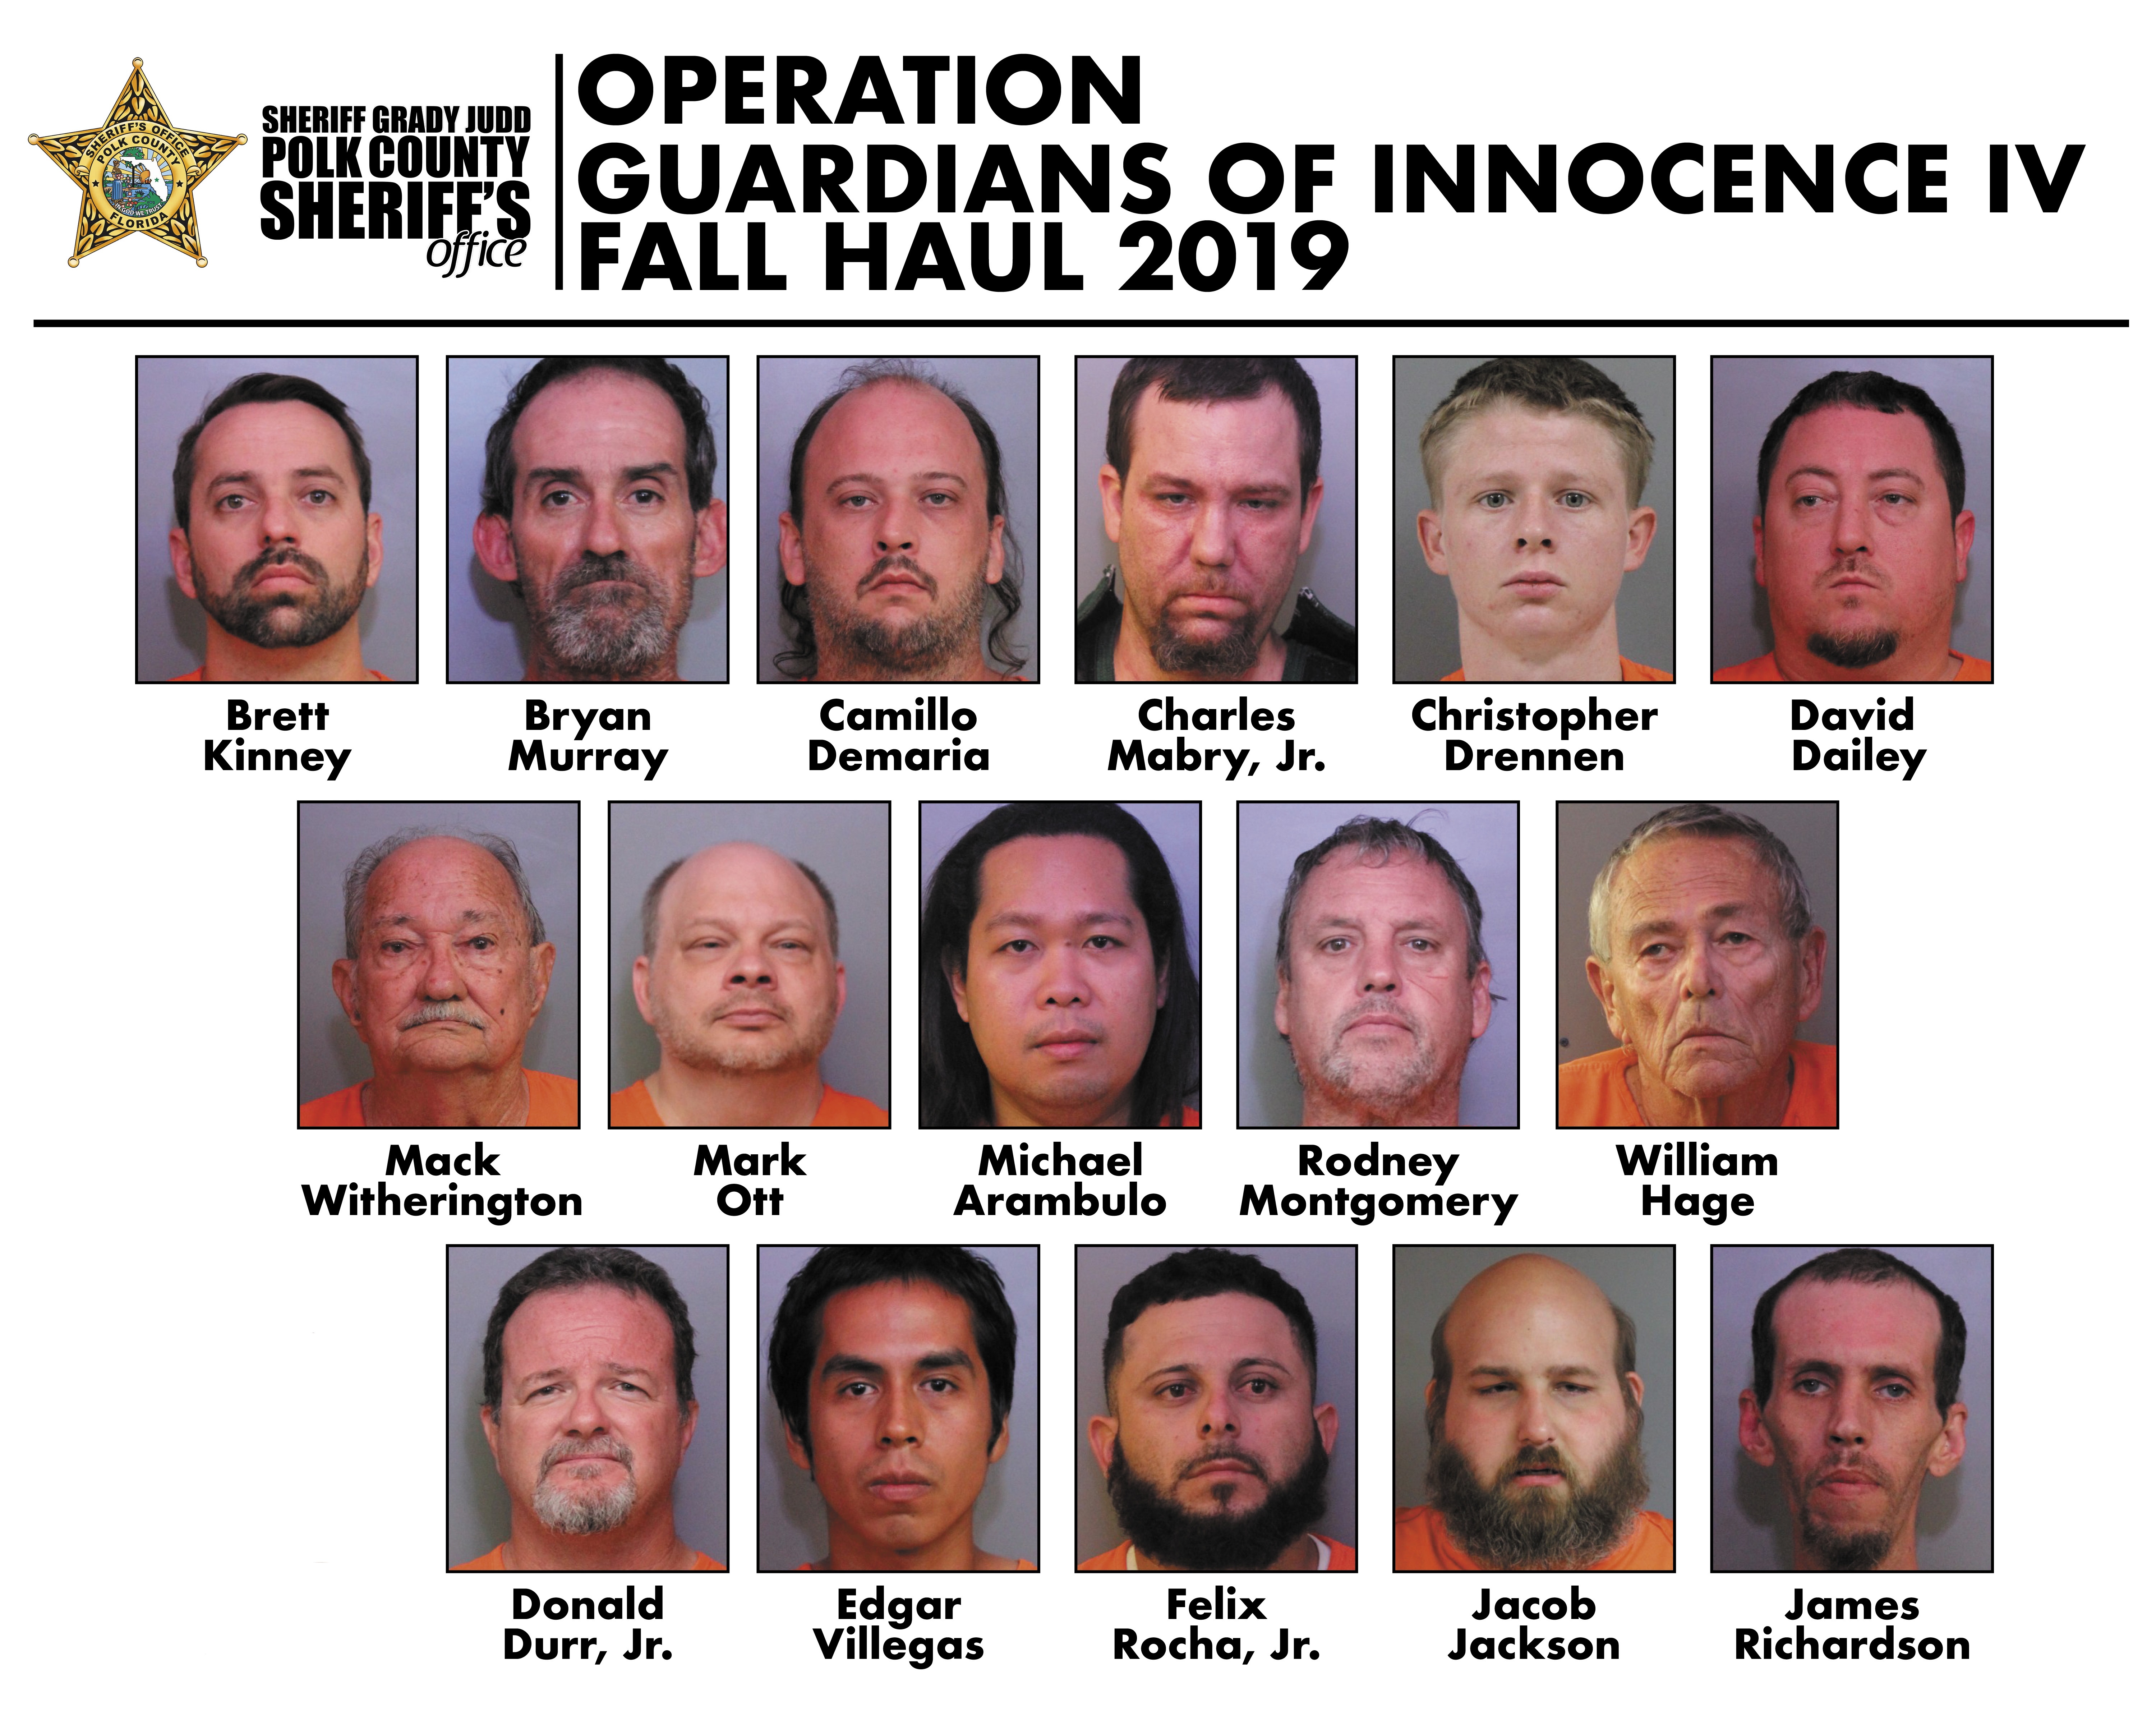 Polk County Sheriffs Office Computer Crimes Unit arrests 17 during Operation Guardians of Innocence IV Fall Haul